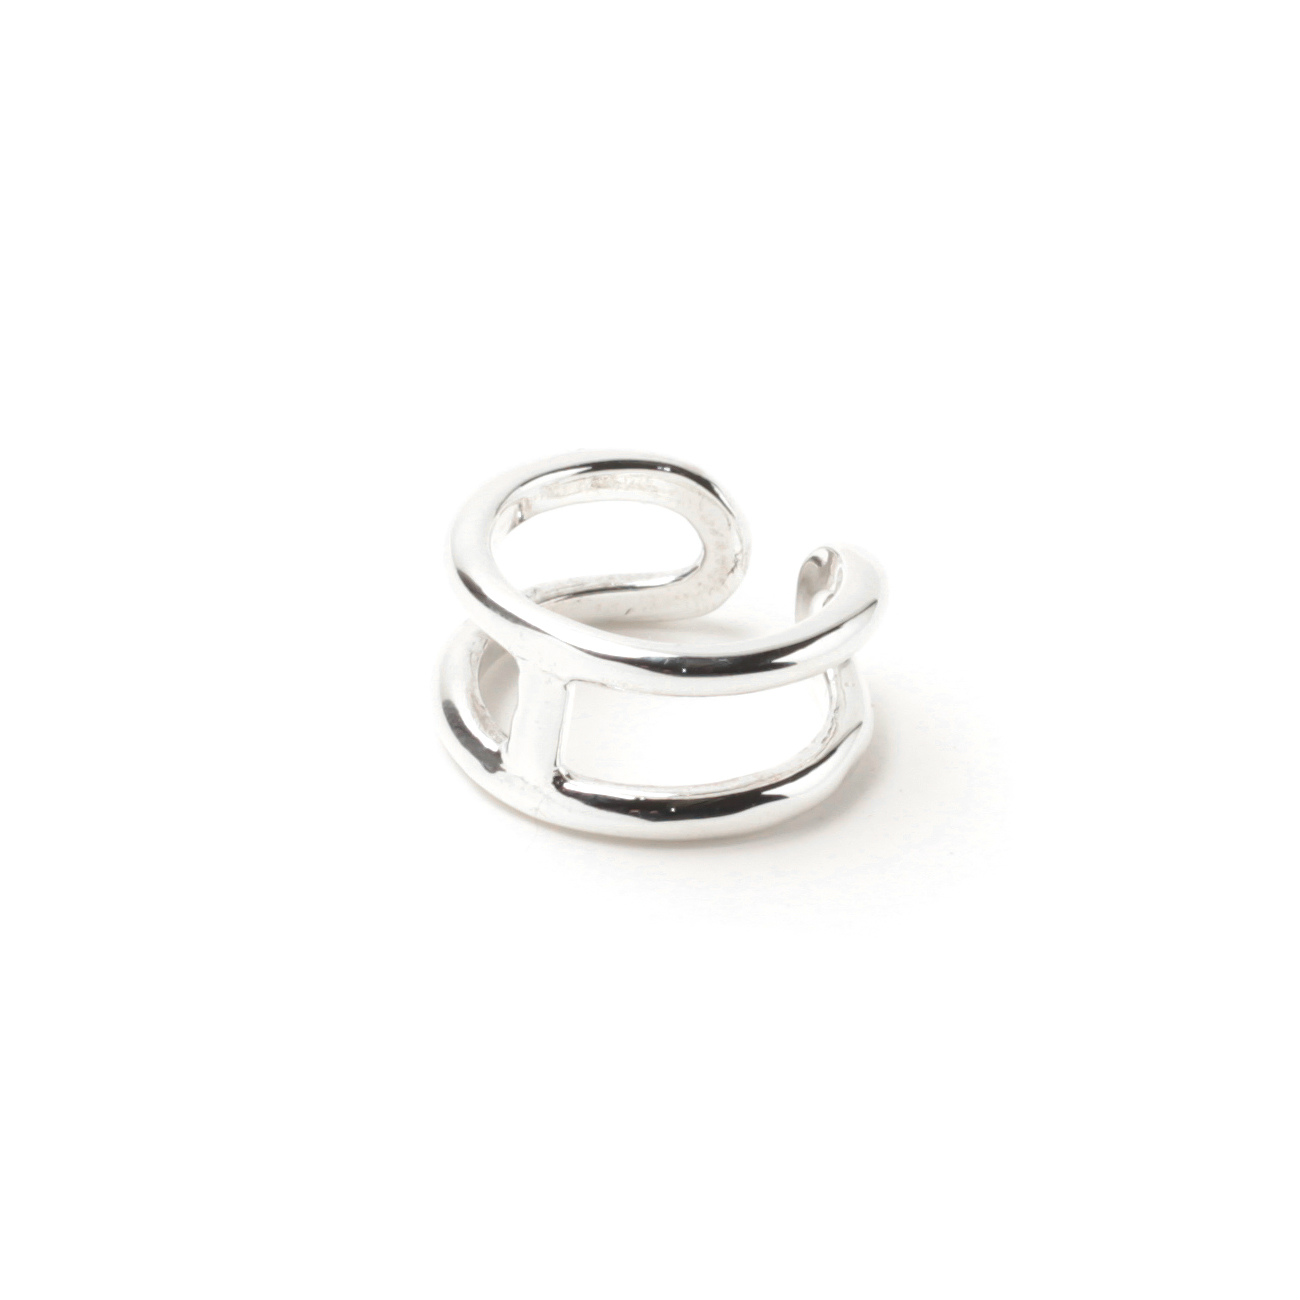 H ring - Silver 925